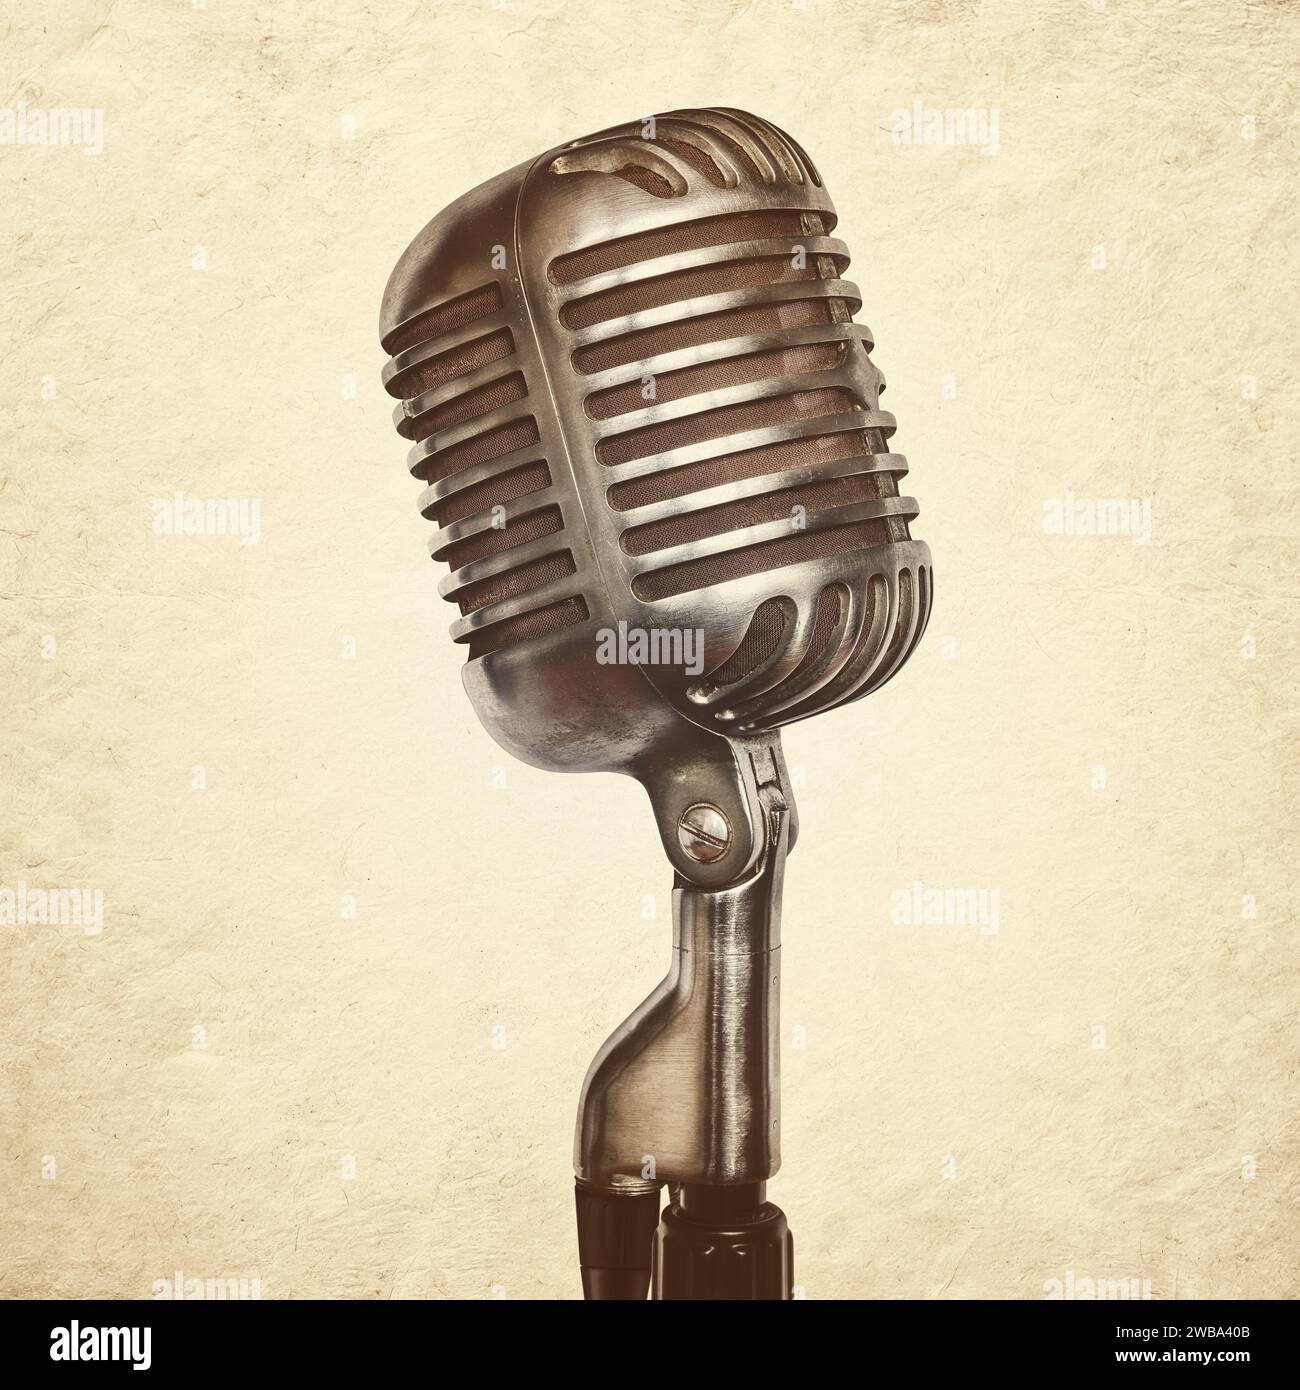 Retro styled image of an authentic vintage audio microphone on stand Stock Photo